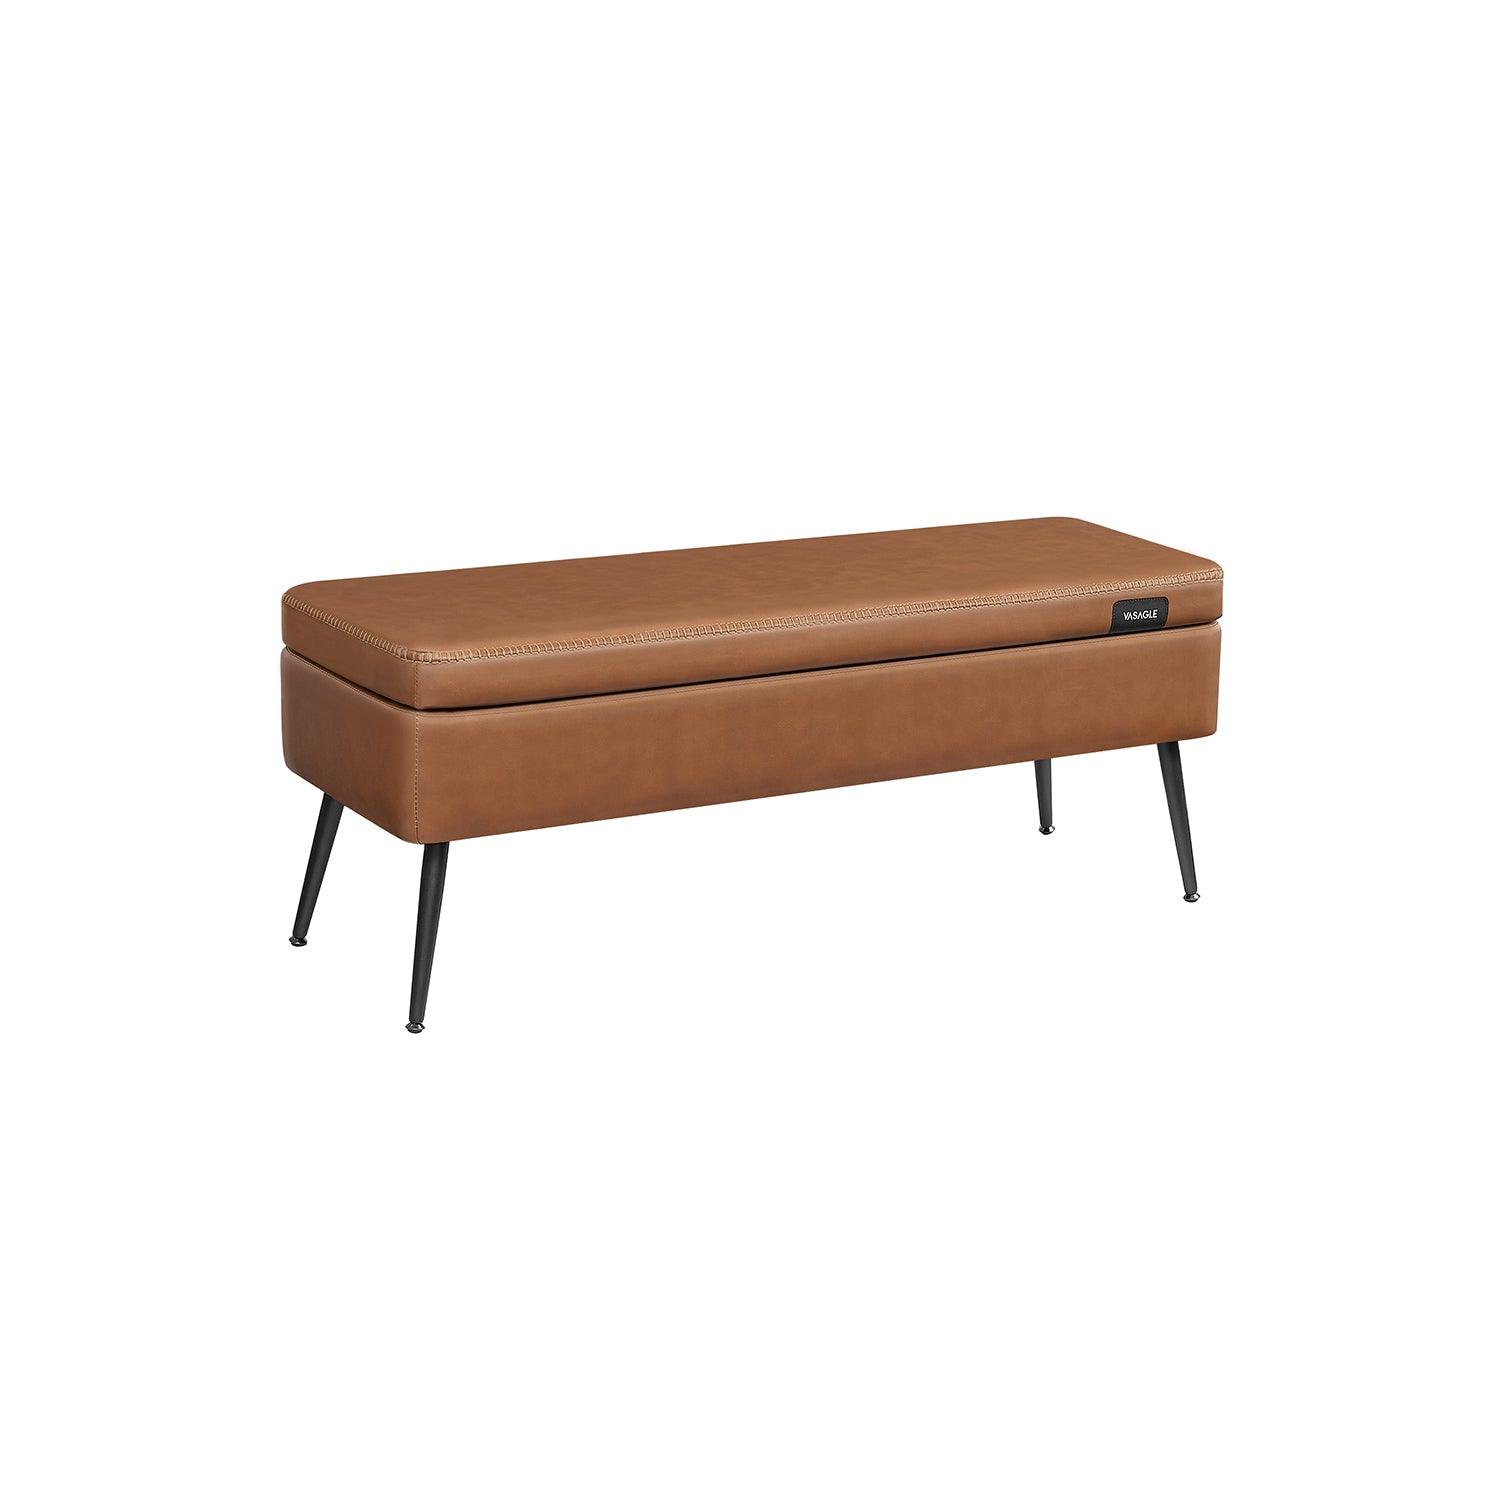 EKHO Collection - Storage Ottoman Bench with Steel Legs, Caramel Brown